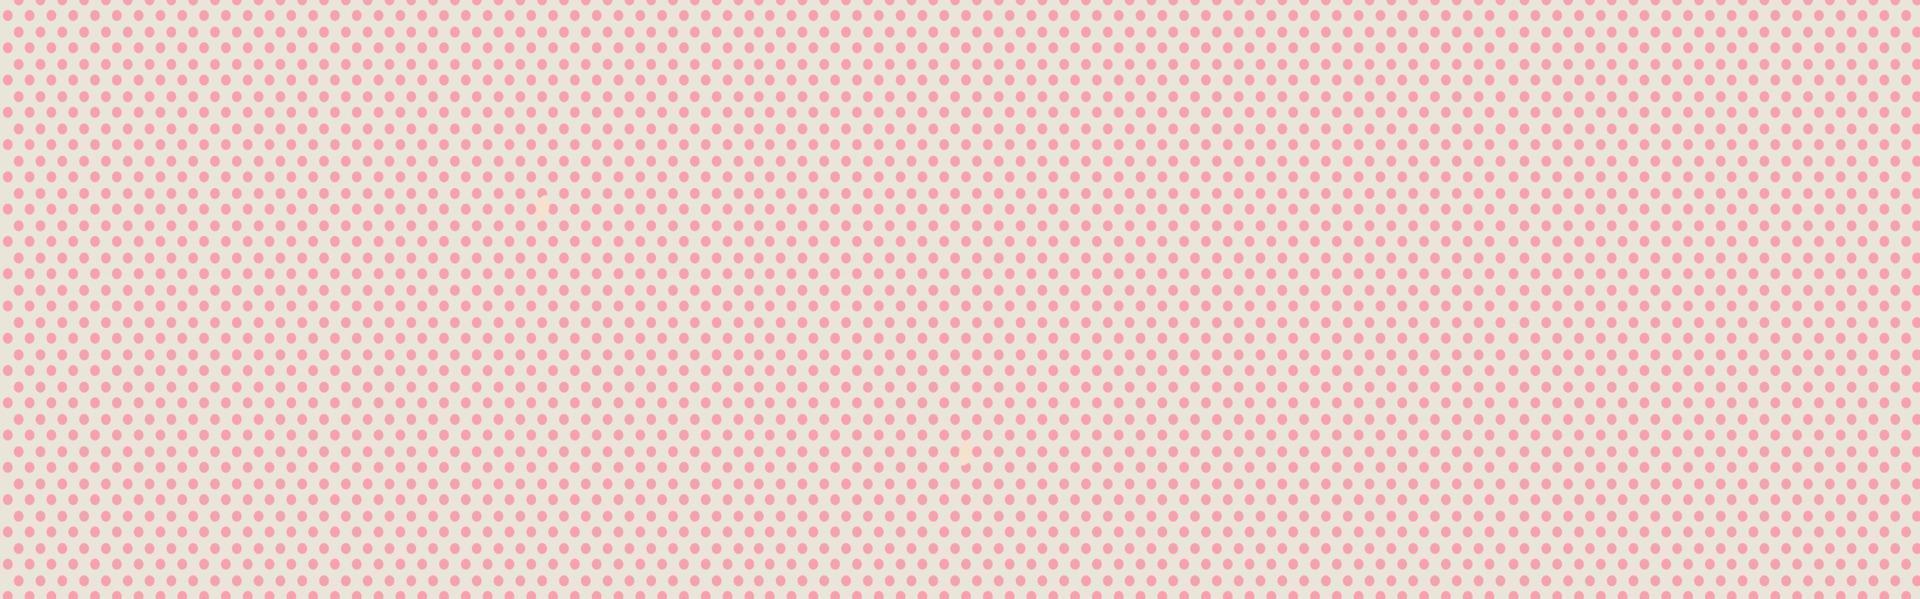 Seamless vector pastel pattern with dark pink polka dots on a sweet baby pink background.